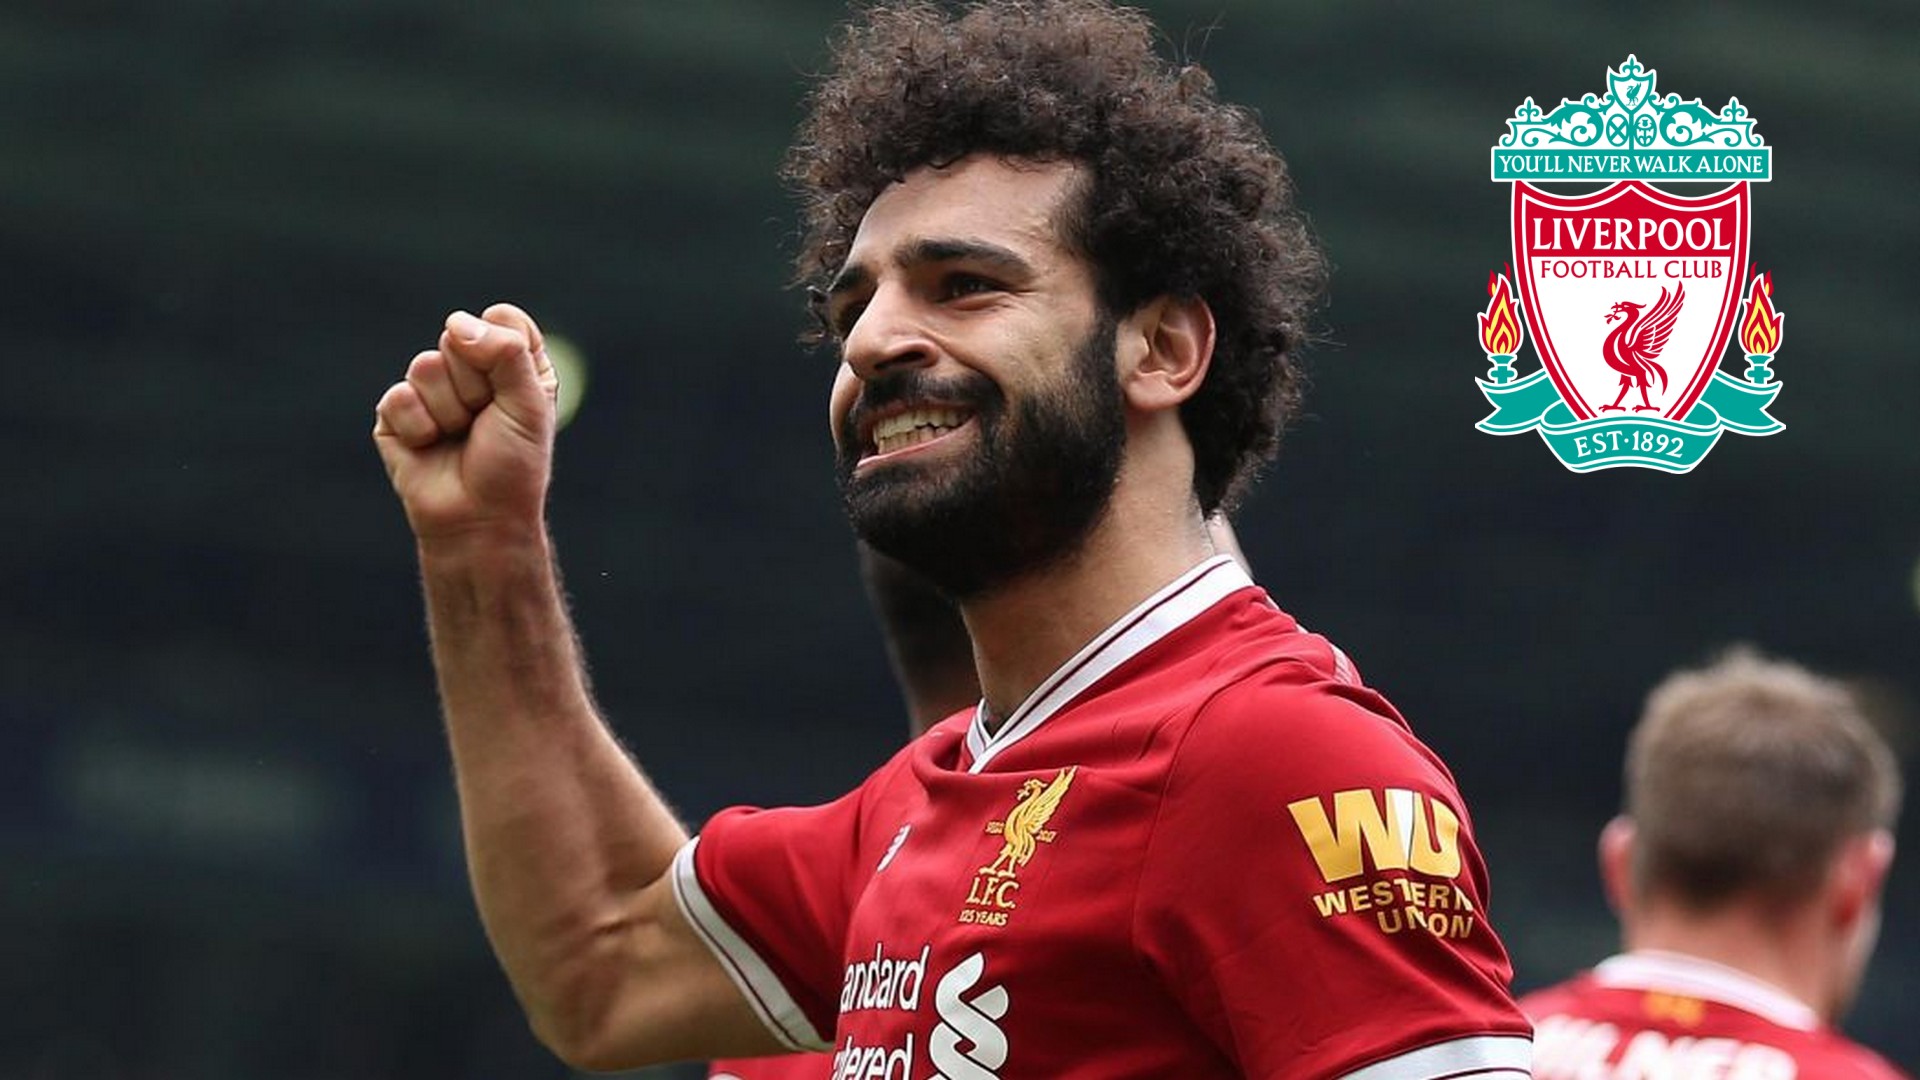 Mohamed Salah Liverpool Desktop Backgrounds with image resolution 1920x1080 pixel. You can make this wallpaper for your Desktop Computer Backgrounds, Mac Wallpapers, Android Lock screen or iPhone Screensavers